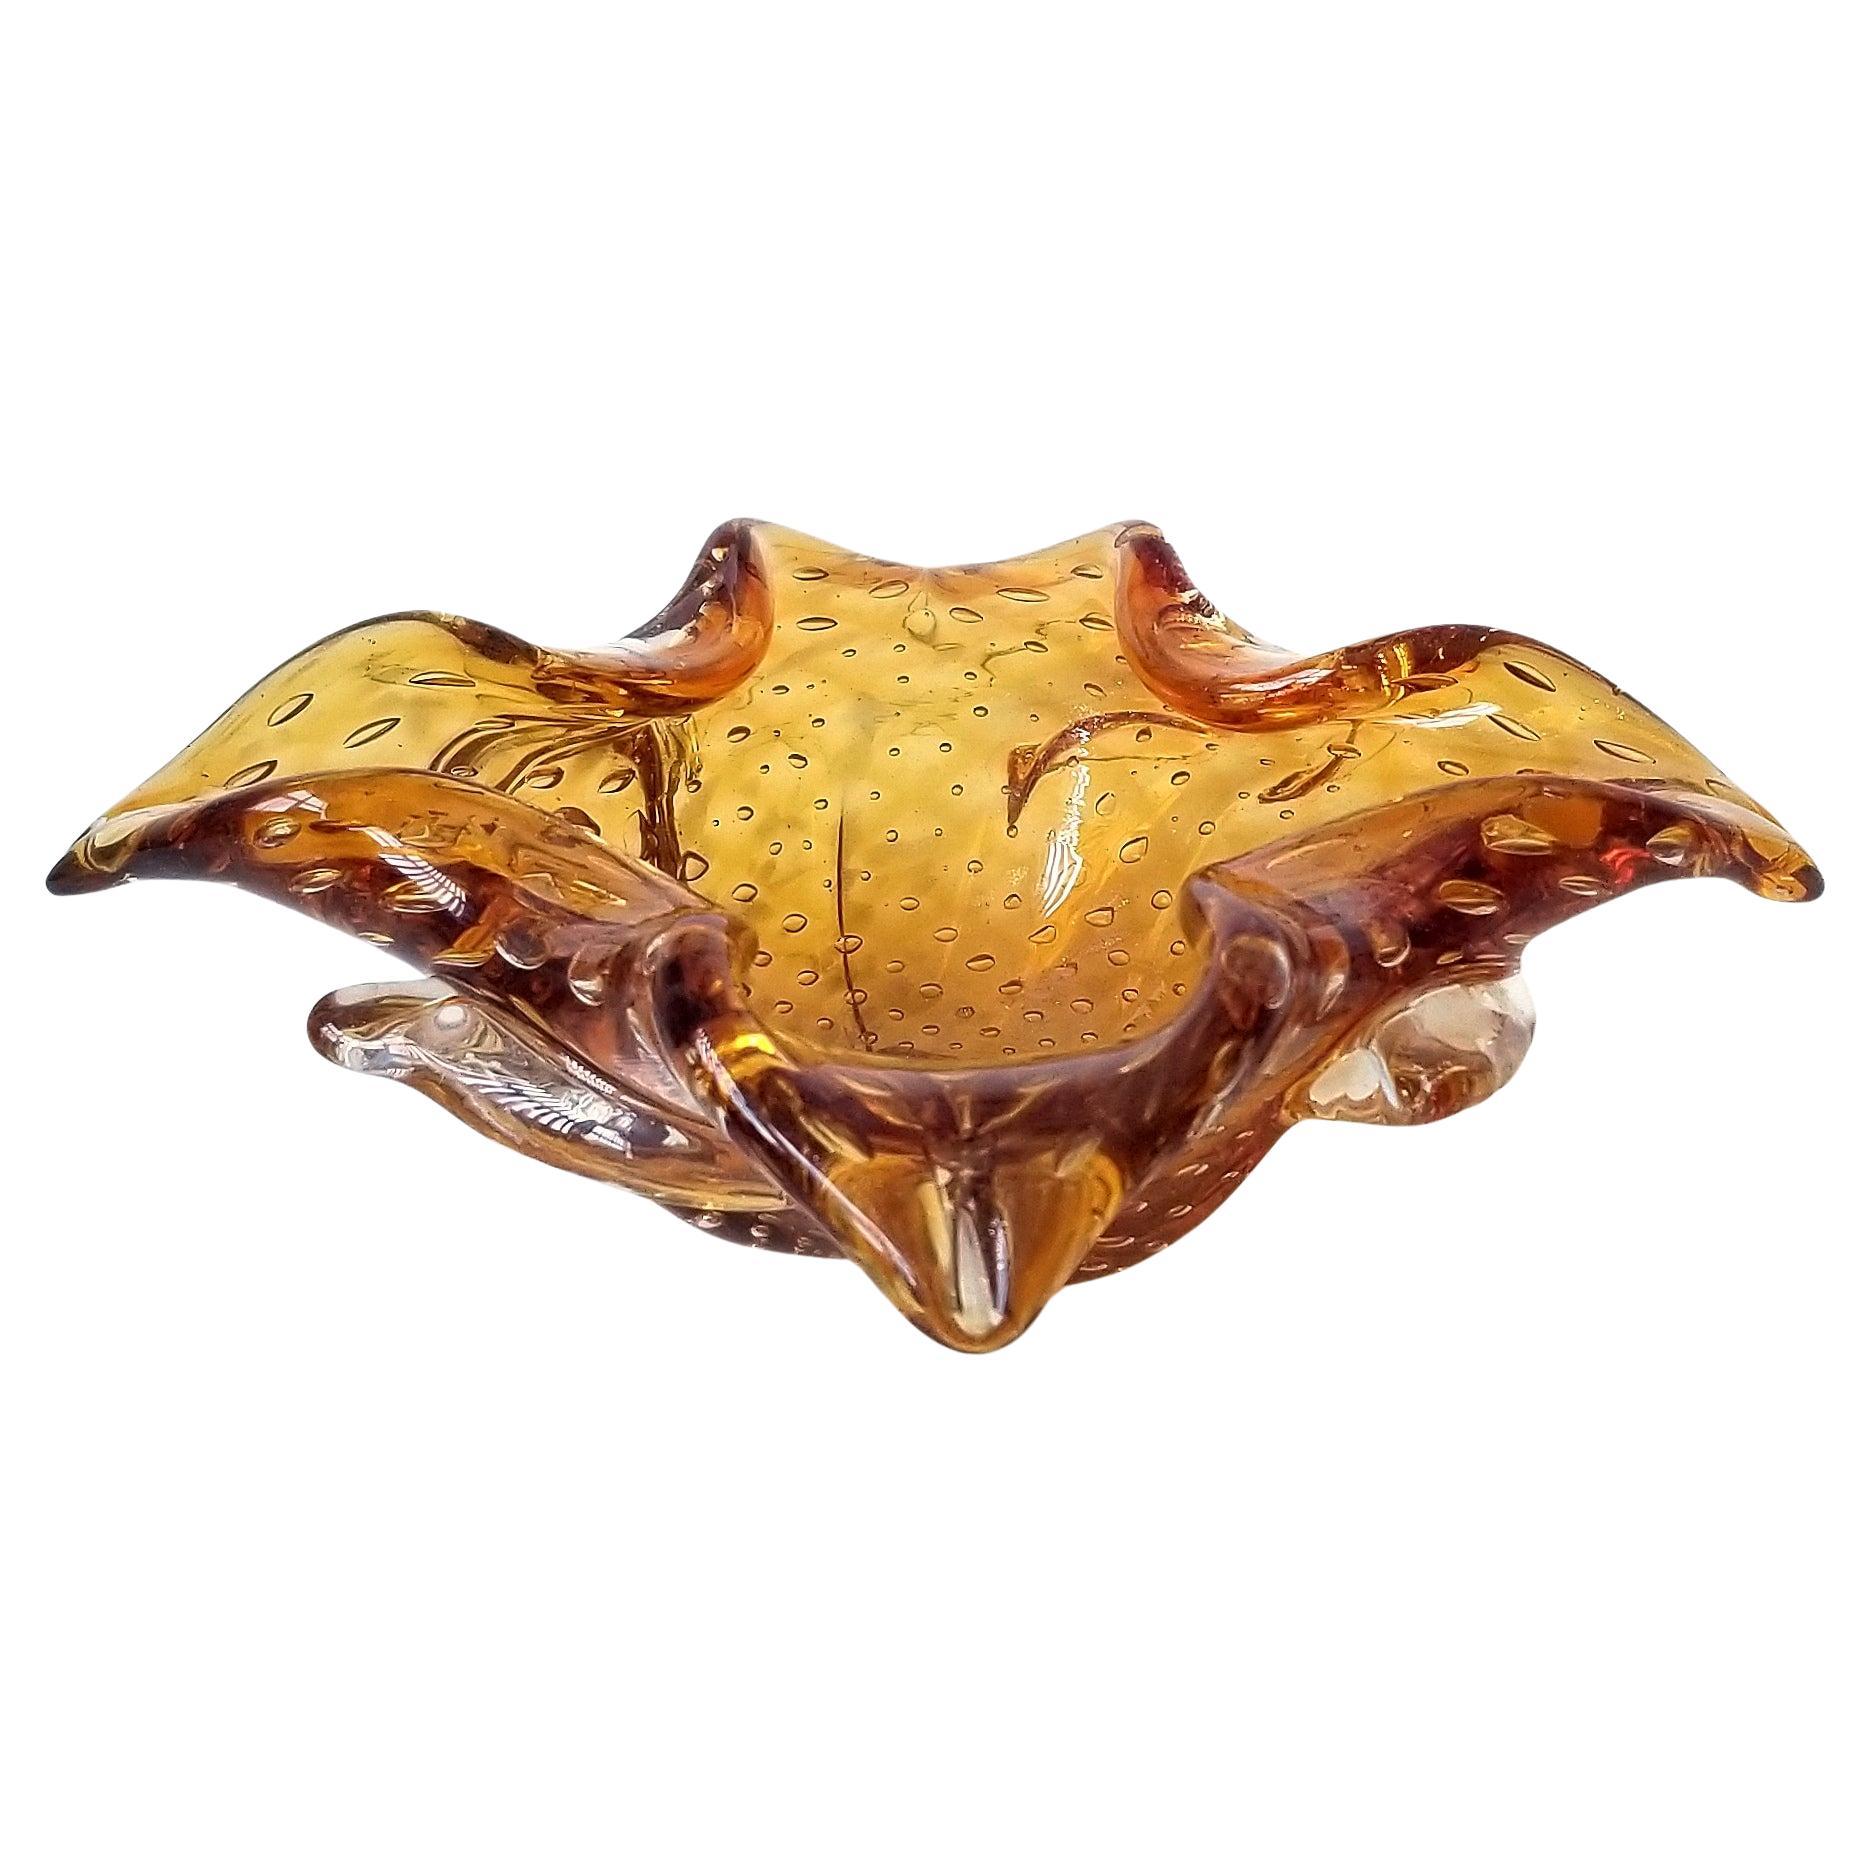 Vintage amber yellow and gold Murano glass decorative bowl, vide-poche or cigar ashtray. Venetian hand blown glass with controlled bubble design (bullicante), discreet gold aventurine and organic floral form. The organic shaped catchall has pinched